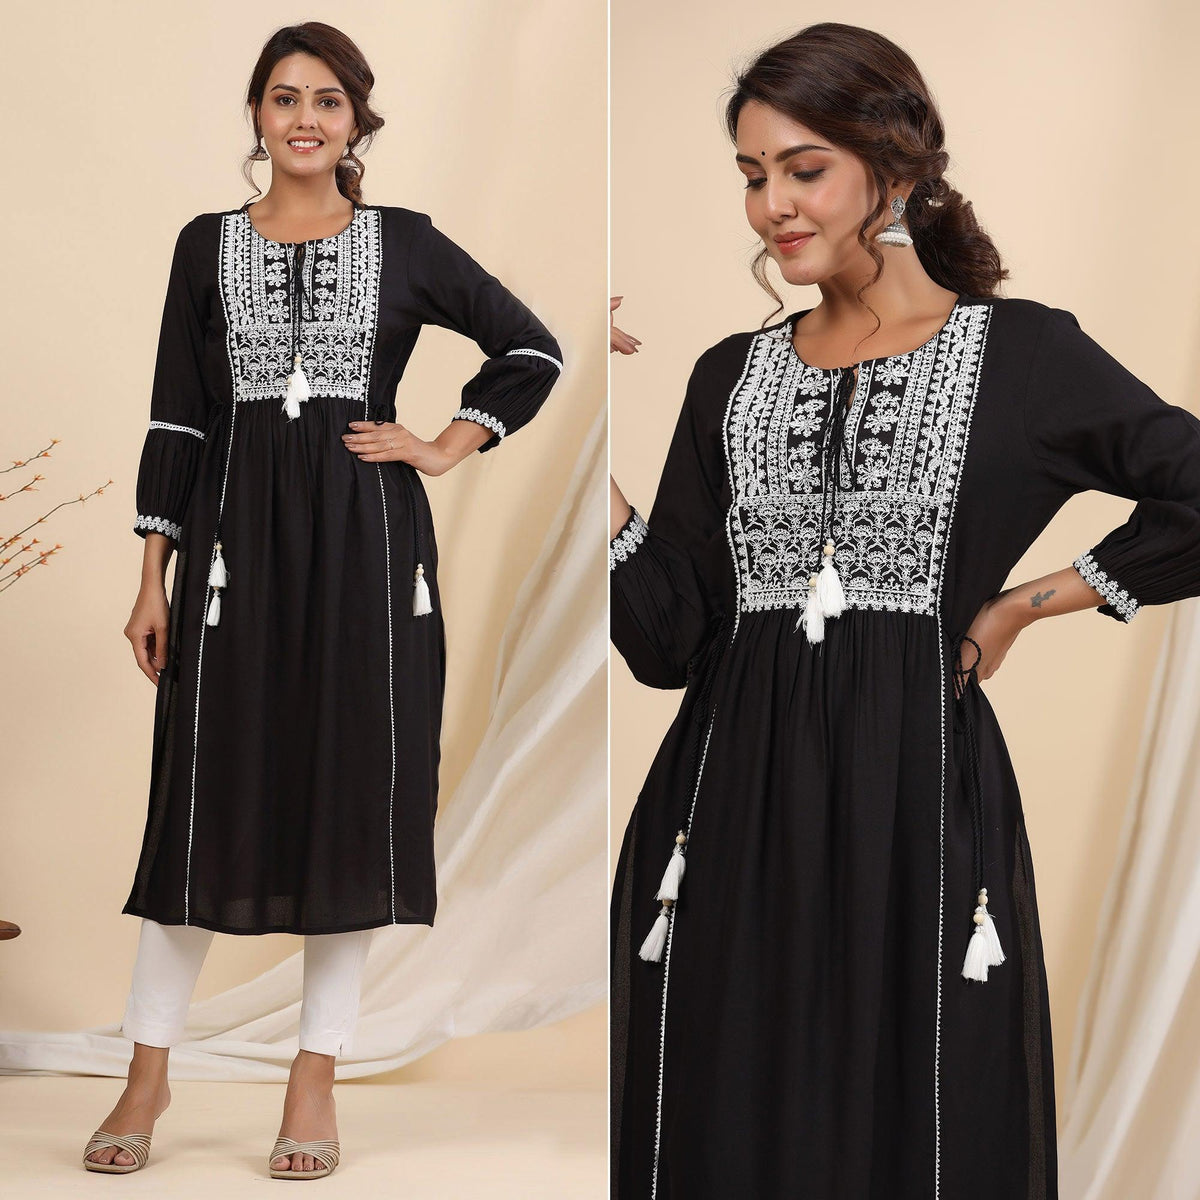 Top more than 108 black kurti with white embroidery best